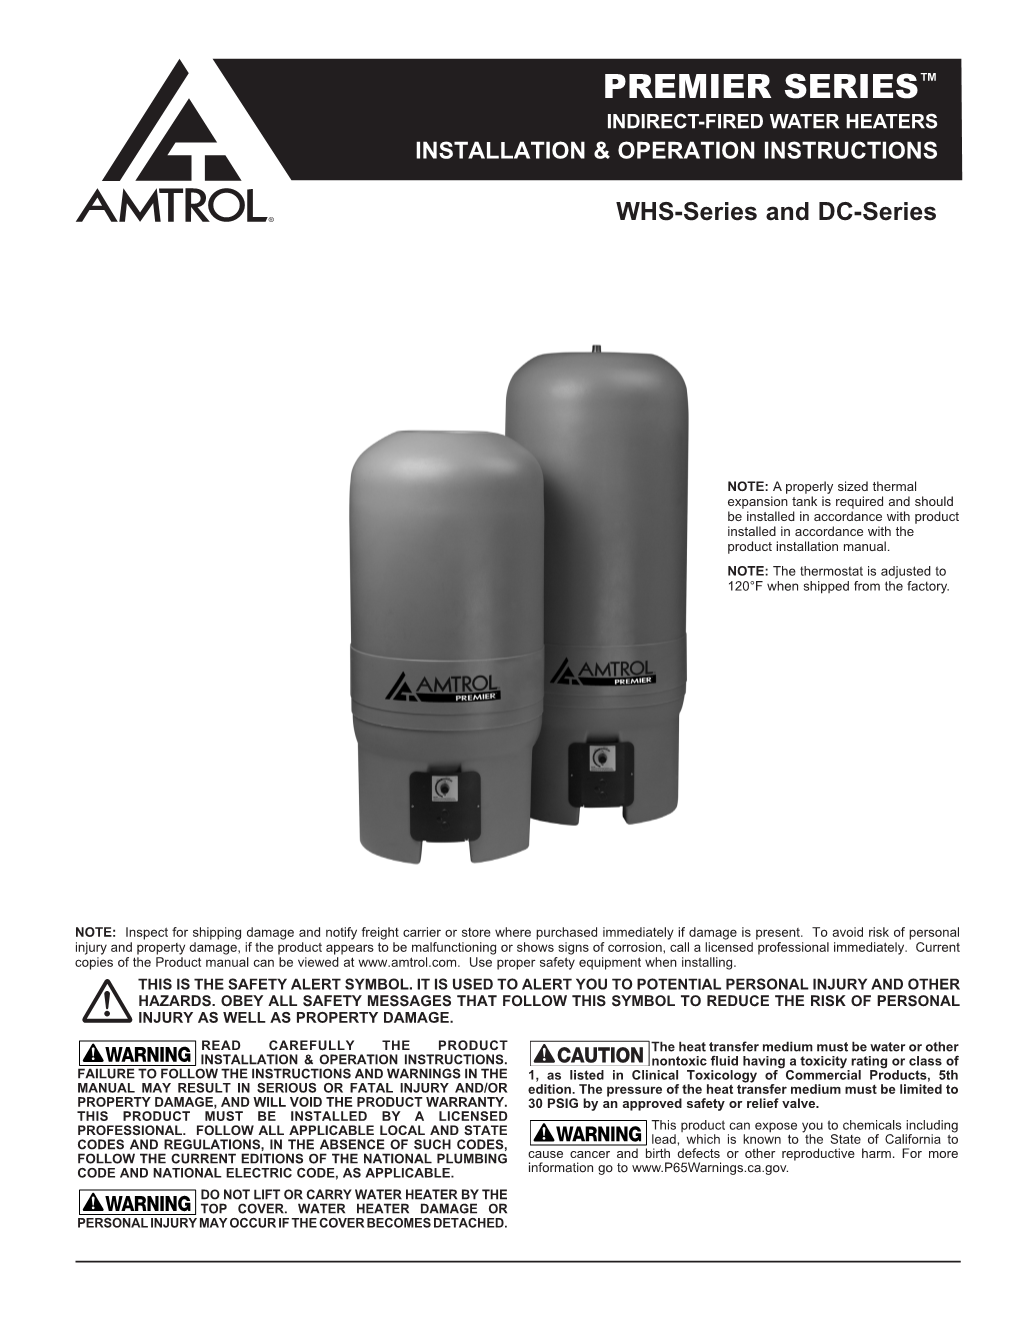 Premier Series™ Indirect-Fired Water Heaters Installation & Operation Instructions